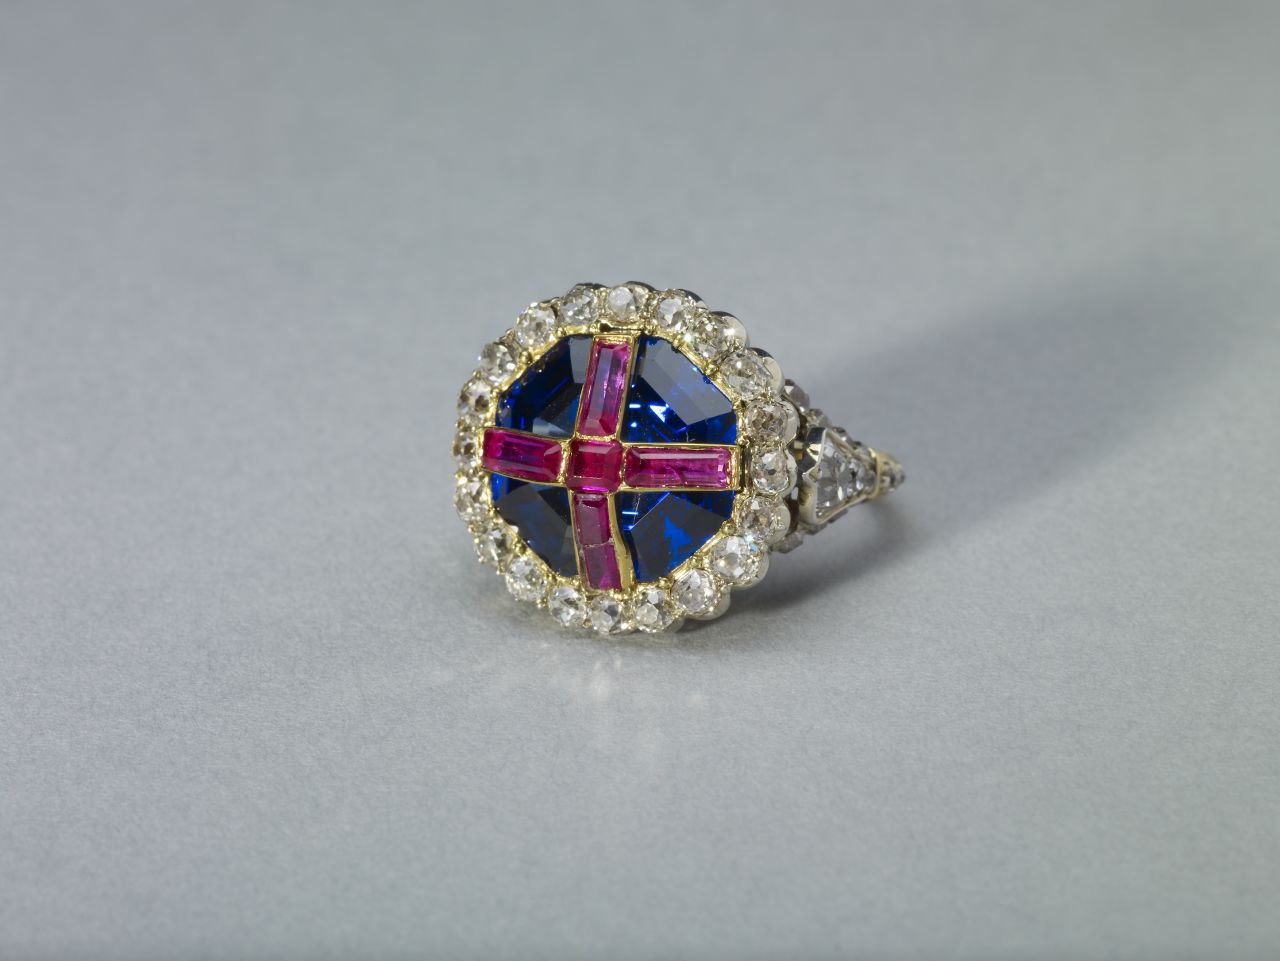 British monarchs are symbolically "married" to the country during their coronation. This coronation ring was made for Queen Victoria, as the traditional one was too large. However, this version was too small, and became stuck on her finger.